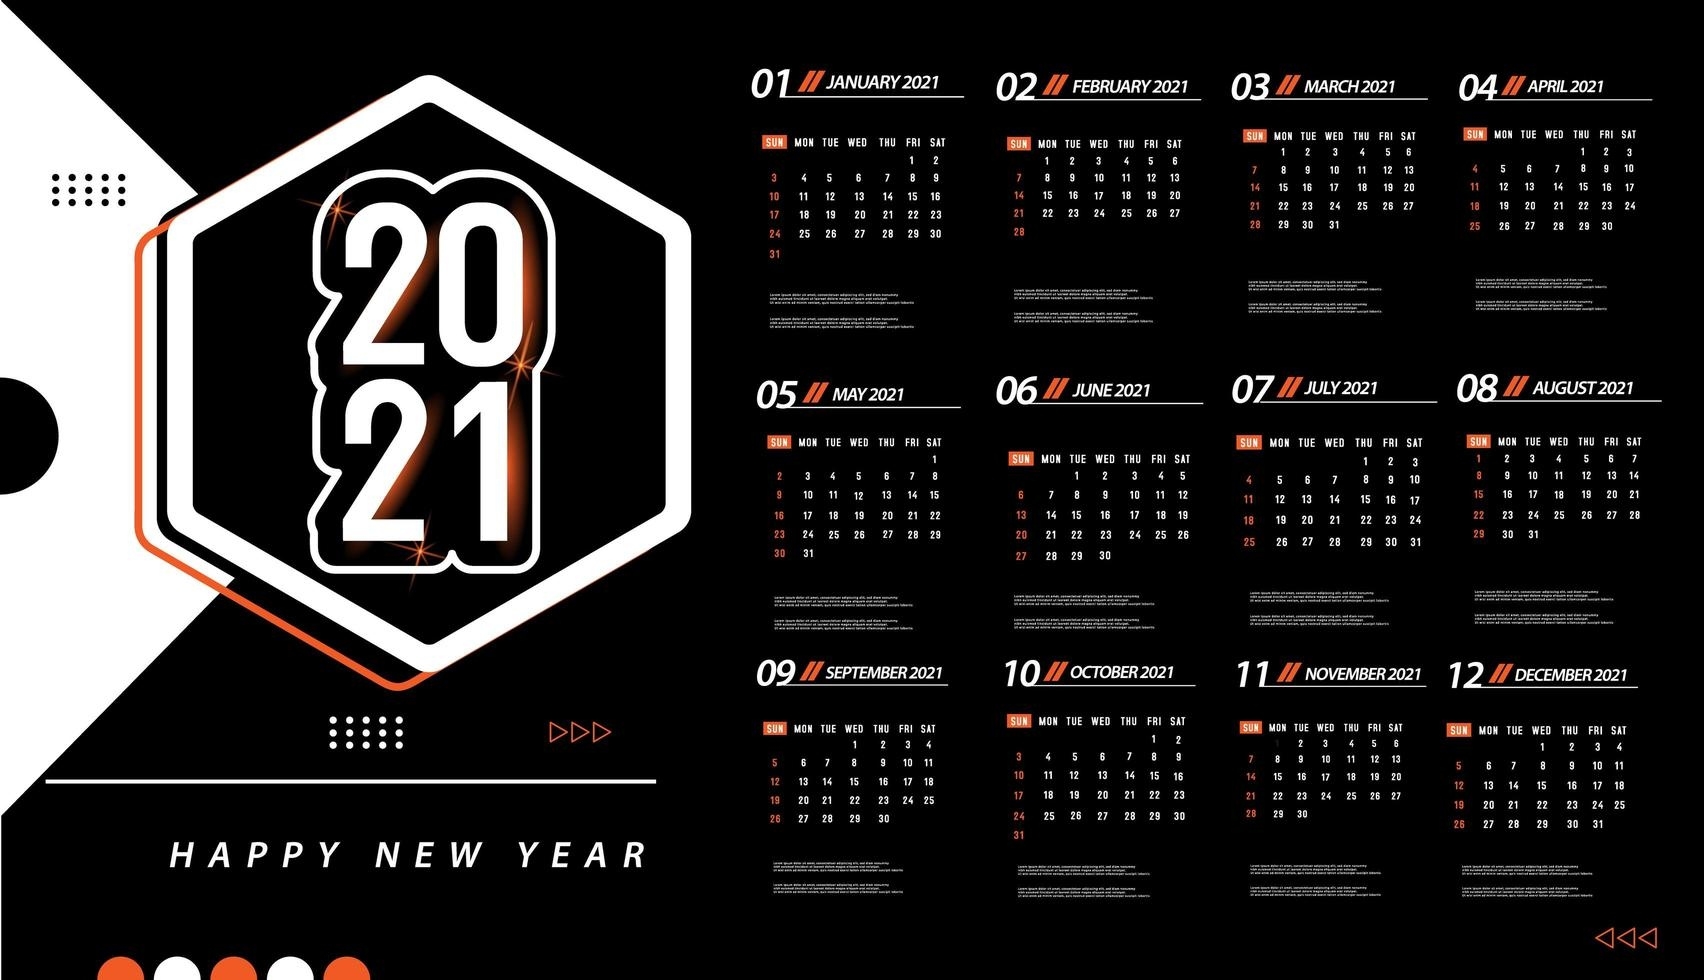 One Page 2021 Calendar Template - Download Free Vectors Calendar Template Vector Free Download